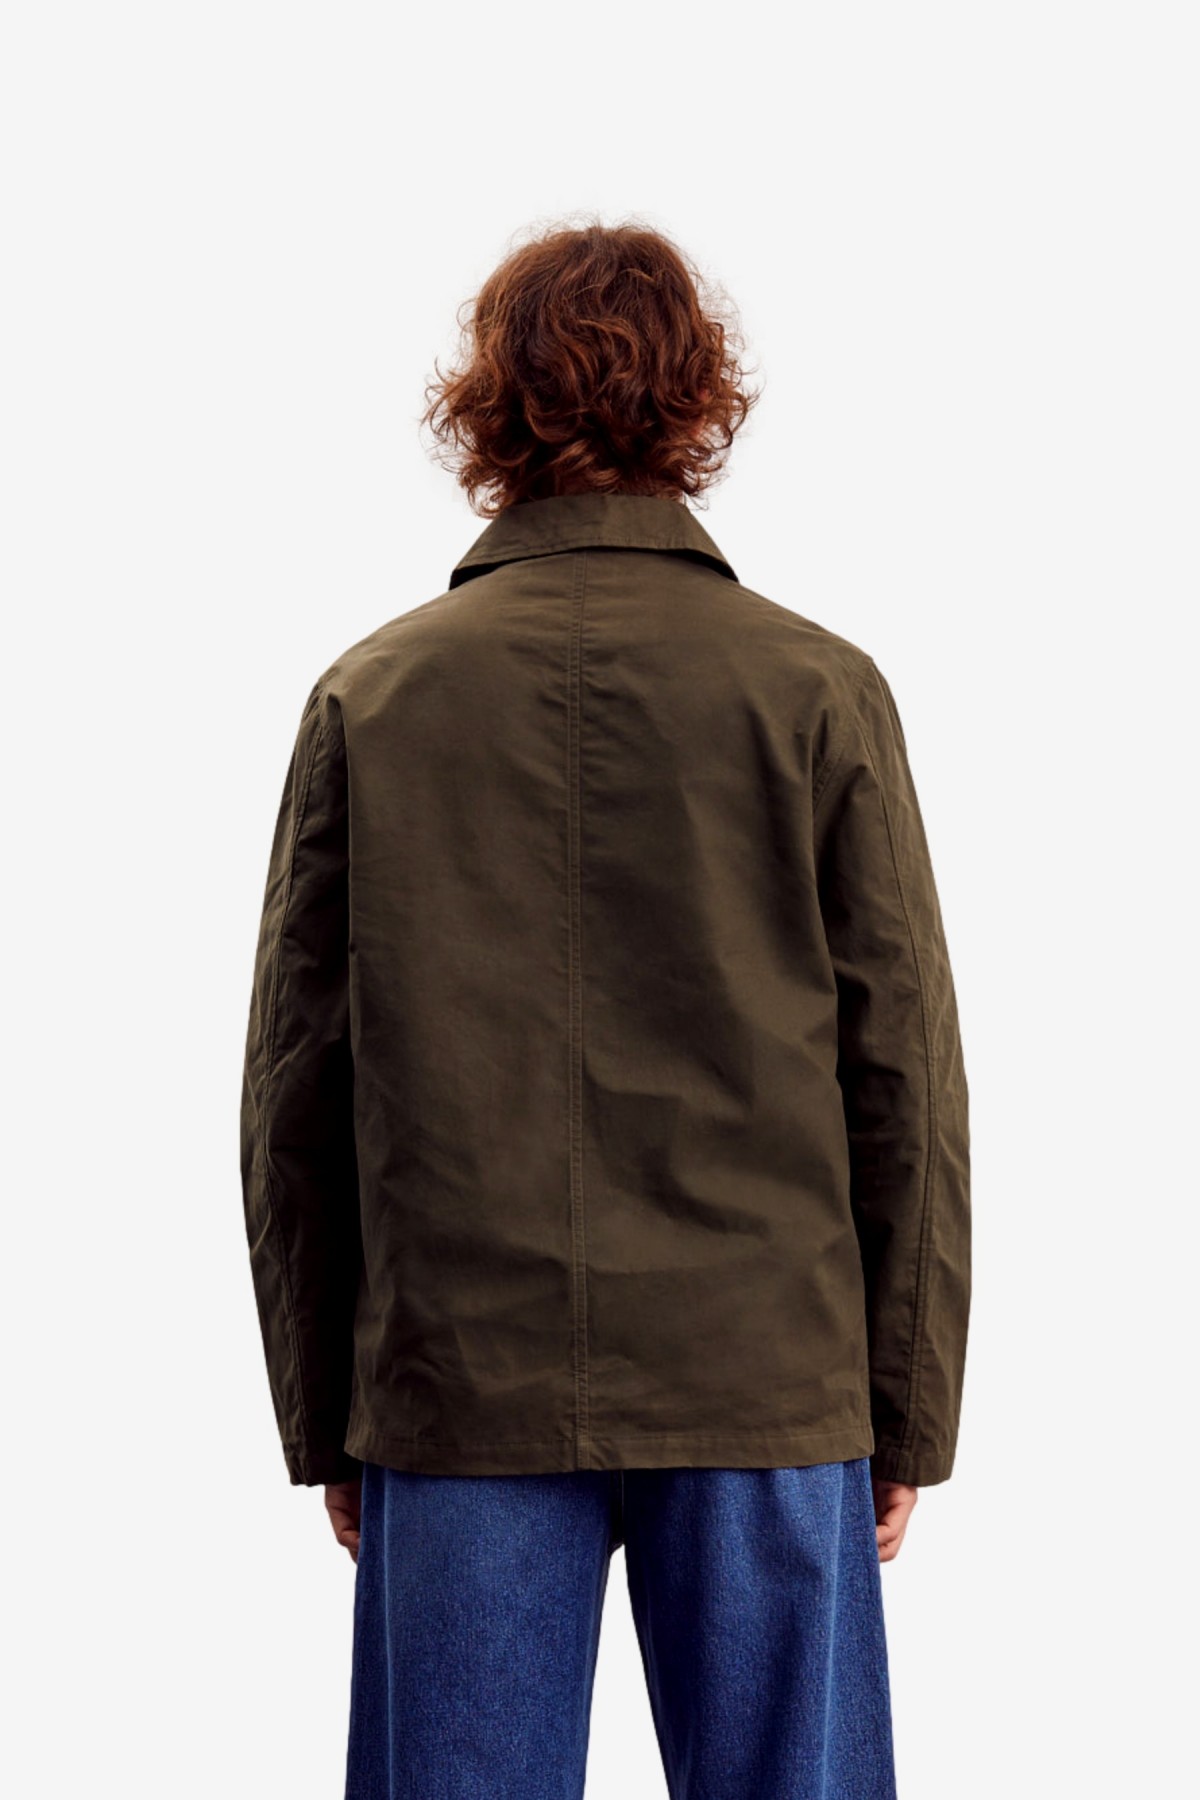 Another Aspect Overshirt 2.0 in Leaf